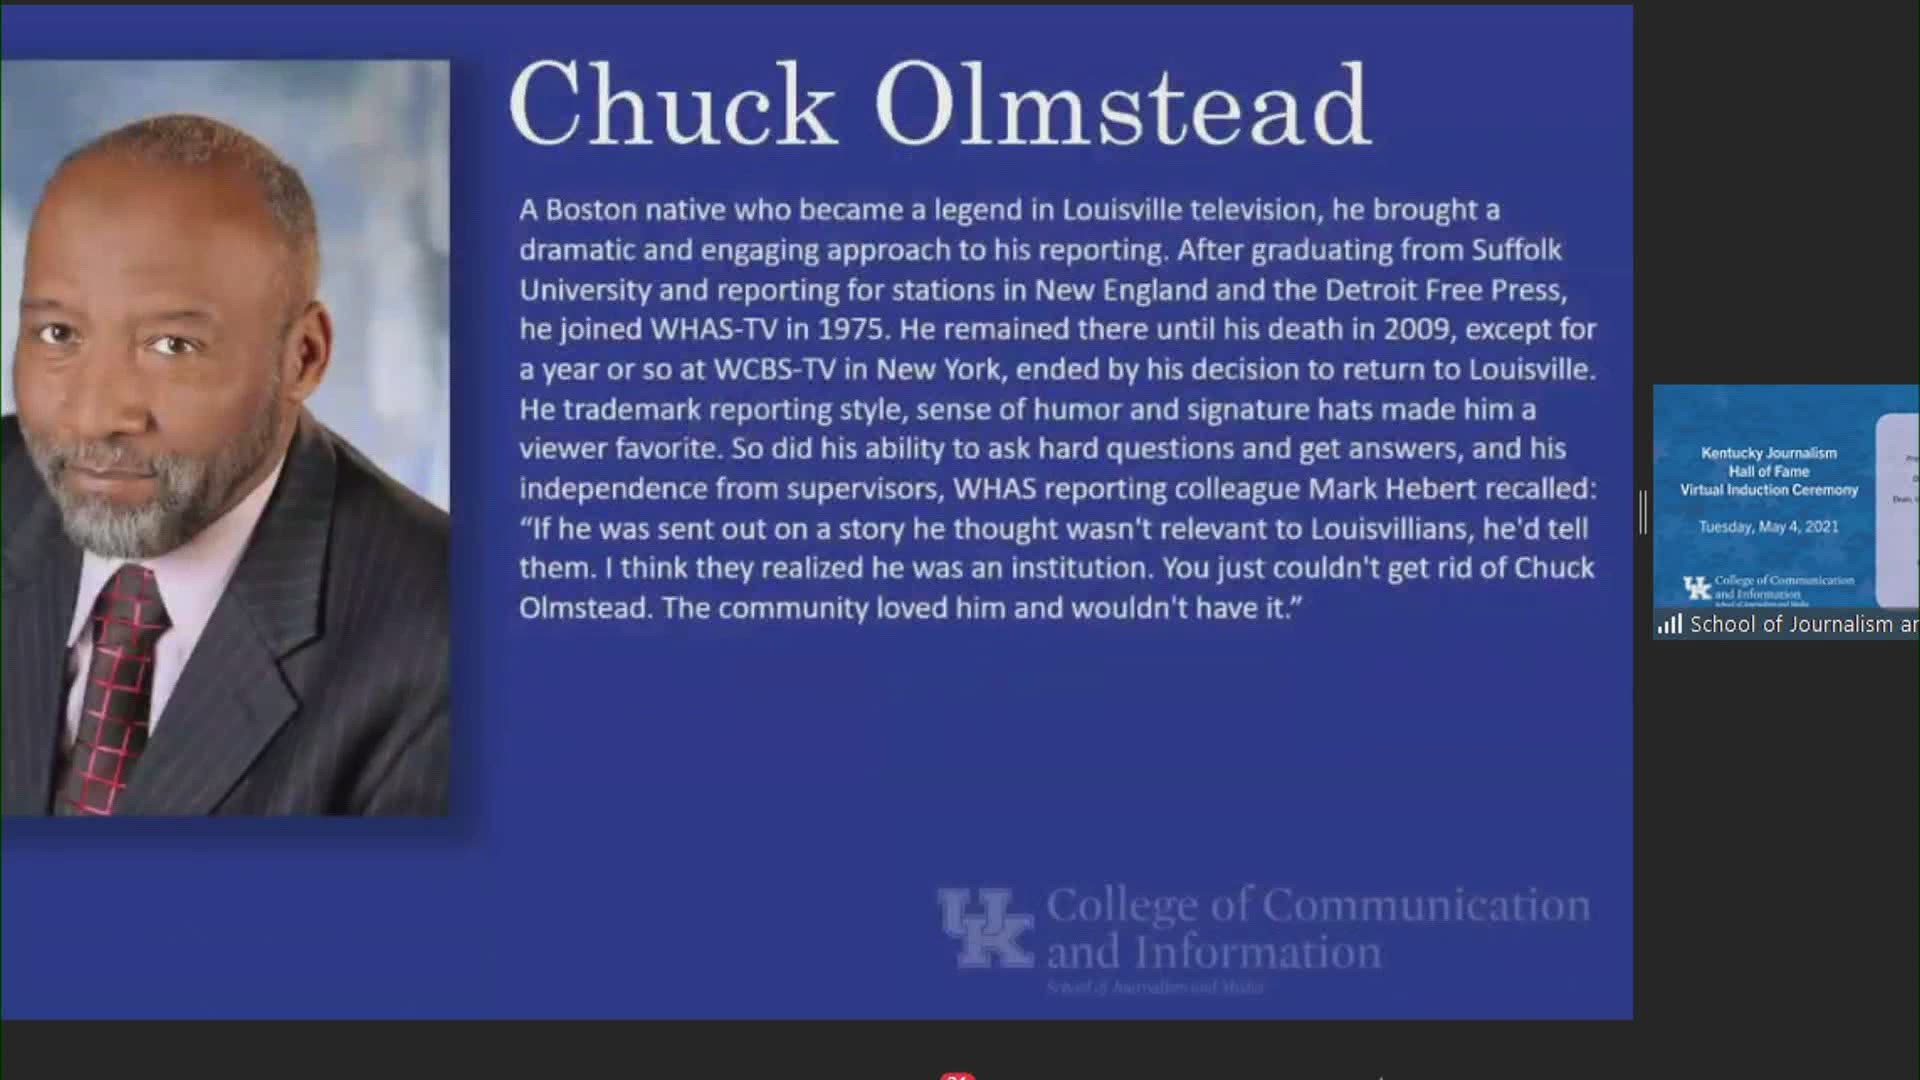 For more than 30 years, Chuck Olmstead's style of reporting engaged the community. His wife Candy and his sons speak about Chuck's journalism legacy.